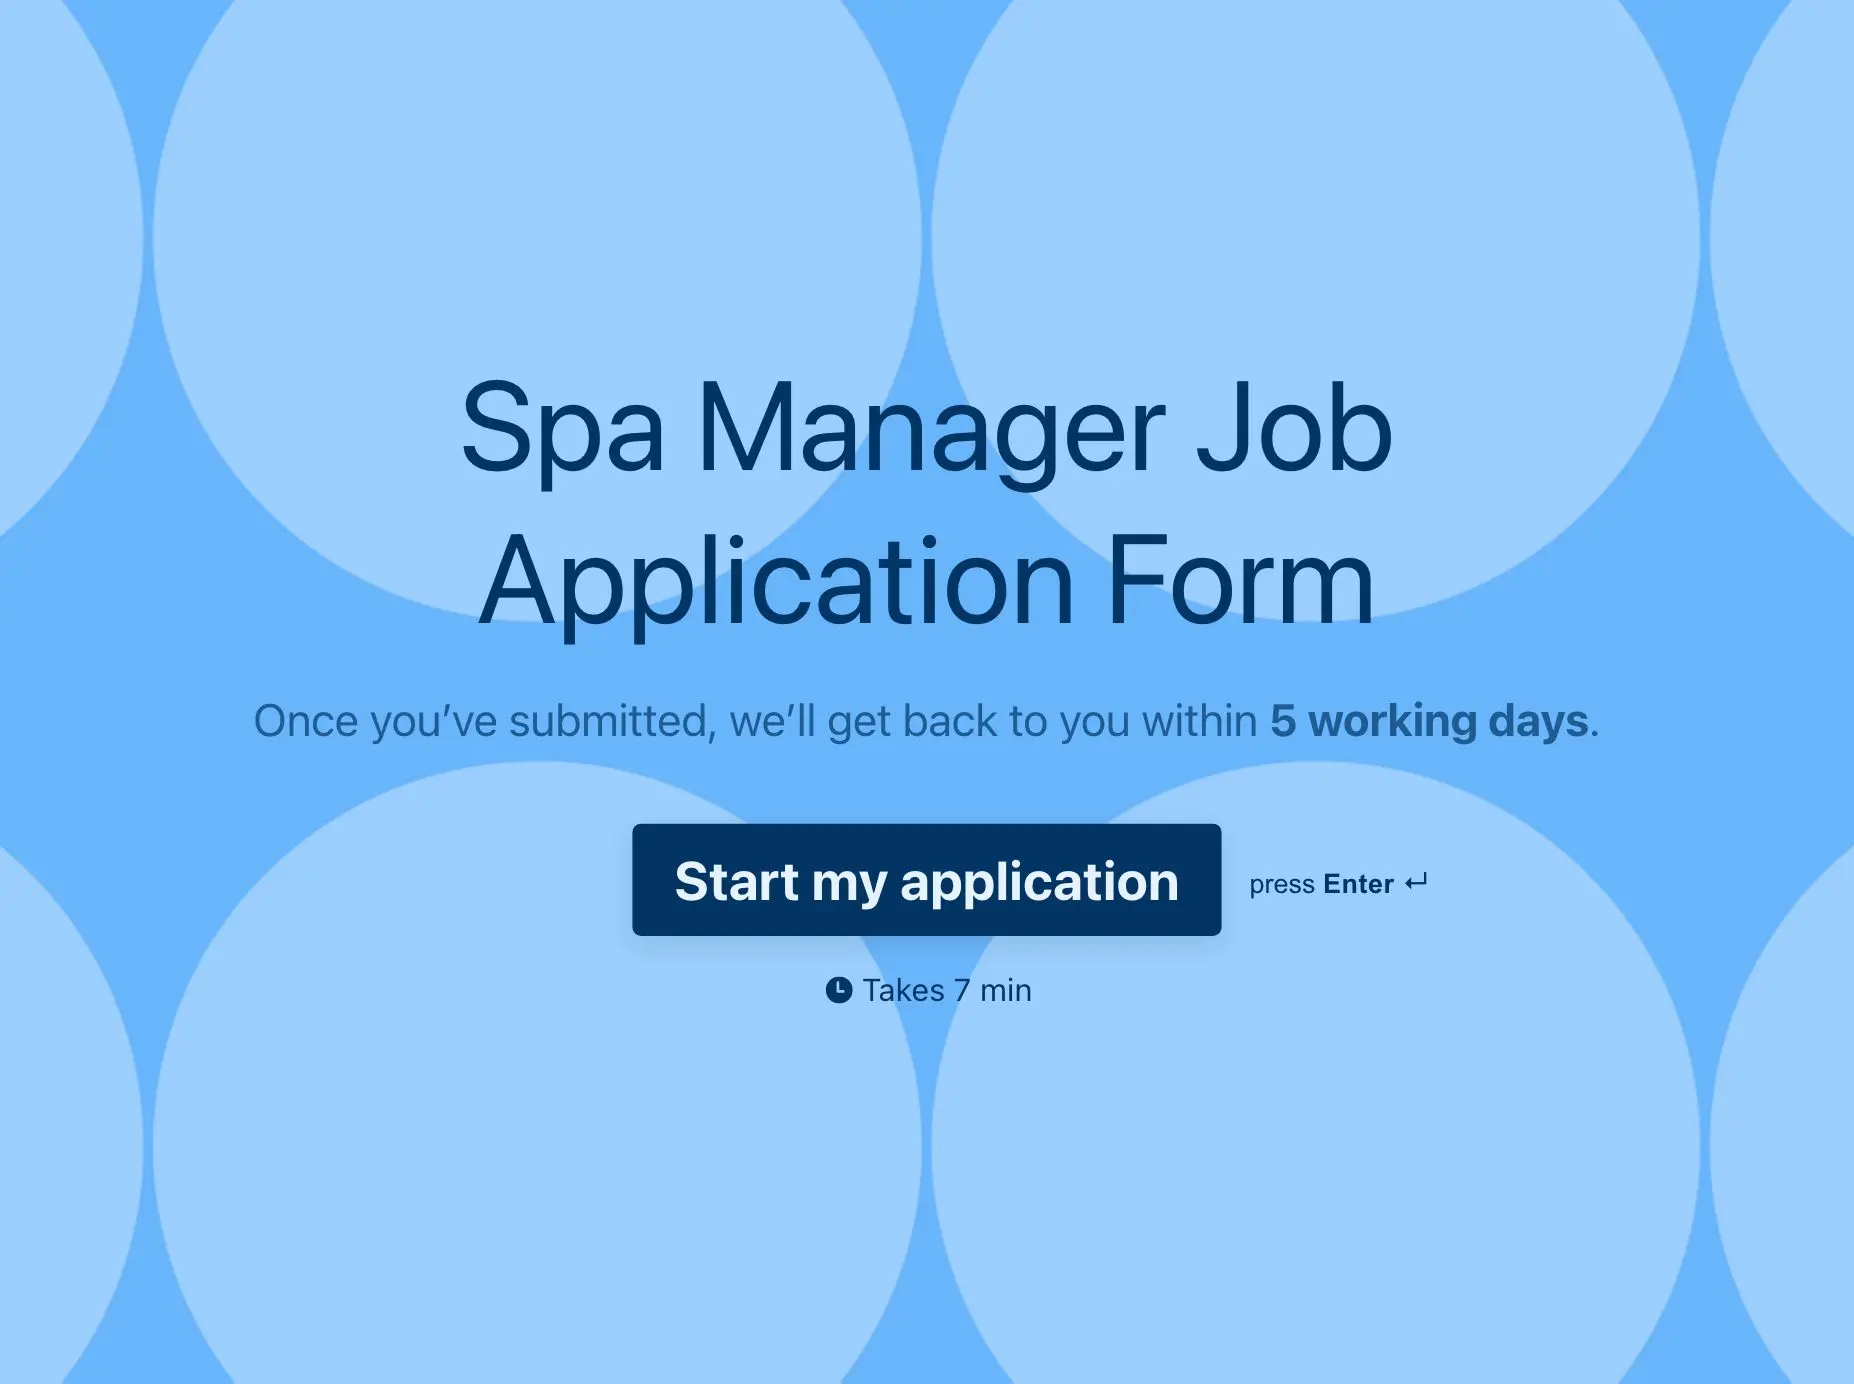 Spa Manager Job Application Form Template Hero